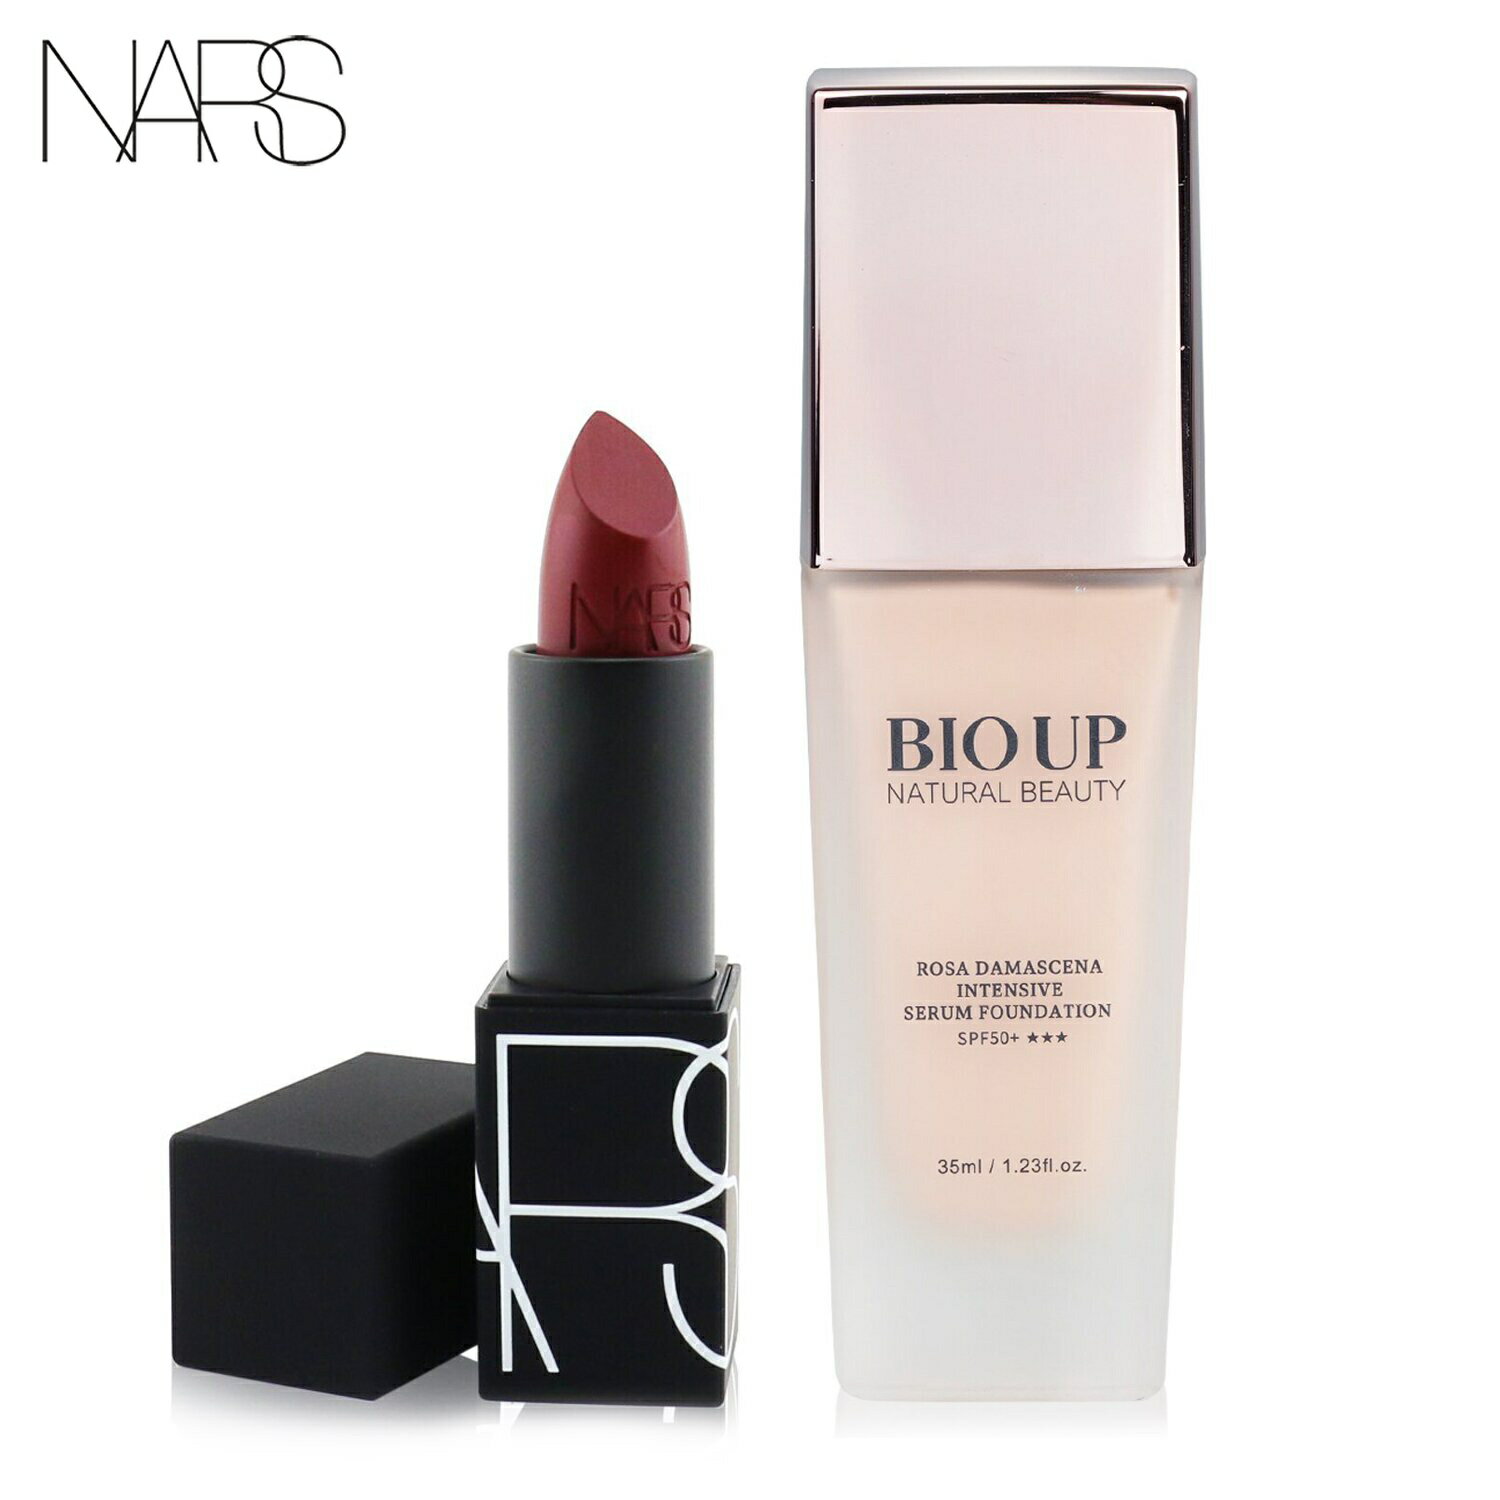 NARS セット＆コフレ ギフトセット ナーズ Lipstick - Force Speciale (Matte) 3.5g + Natural Beauty ..